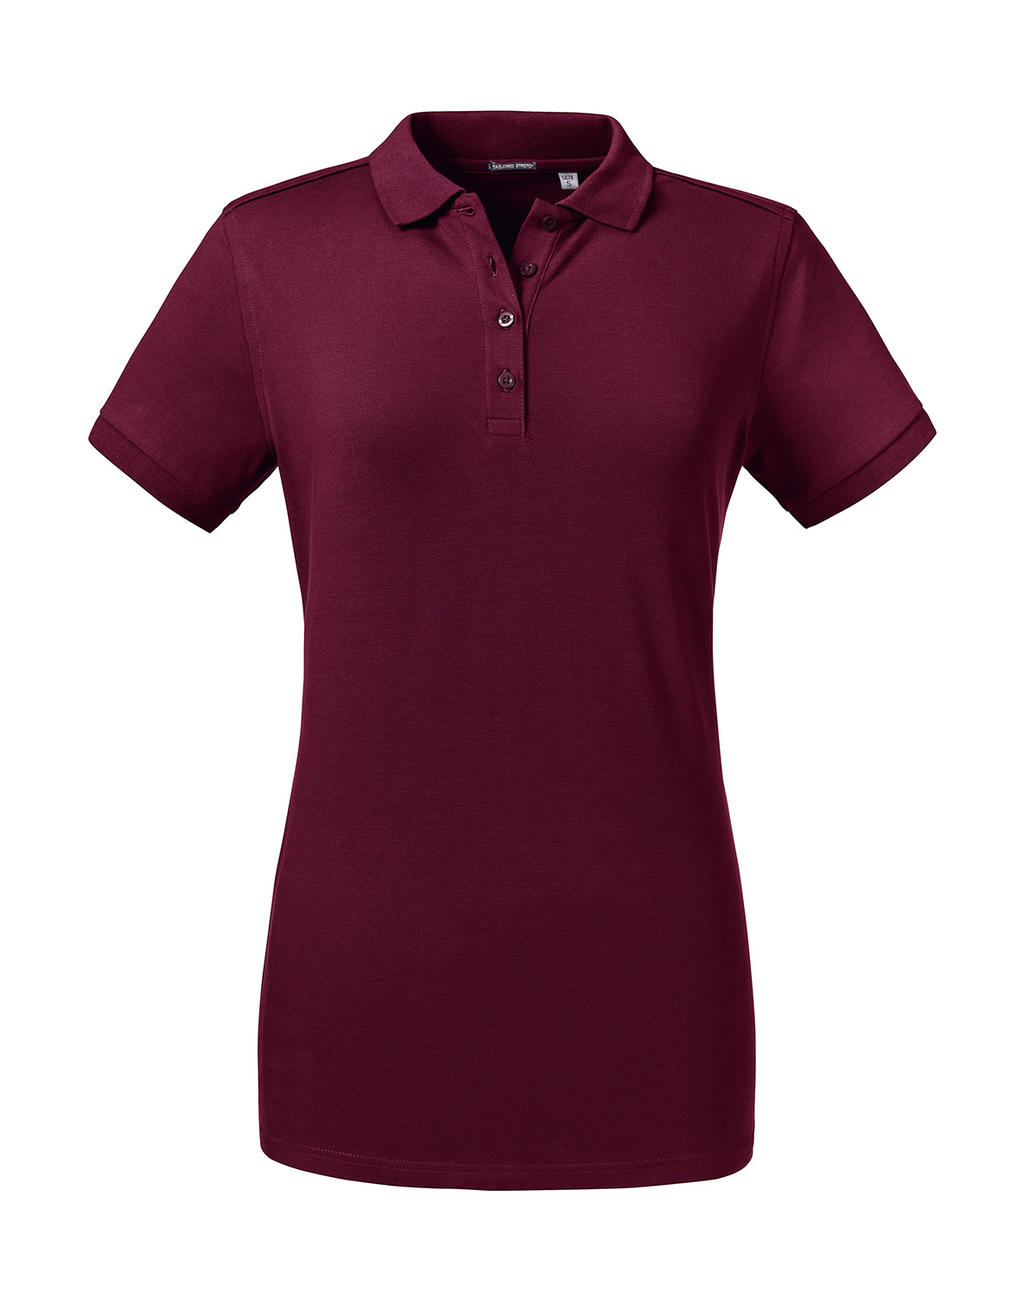  Ladies Tailored Stretch Polo in Farbe Burgundy